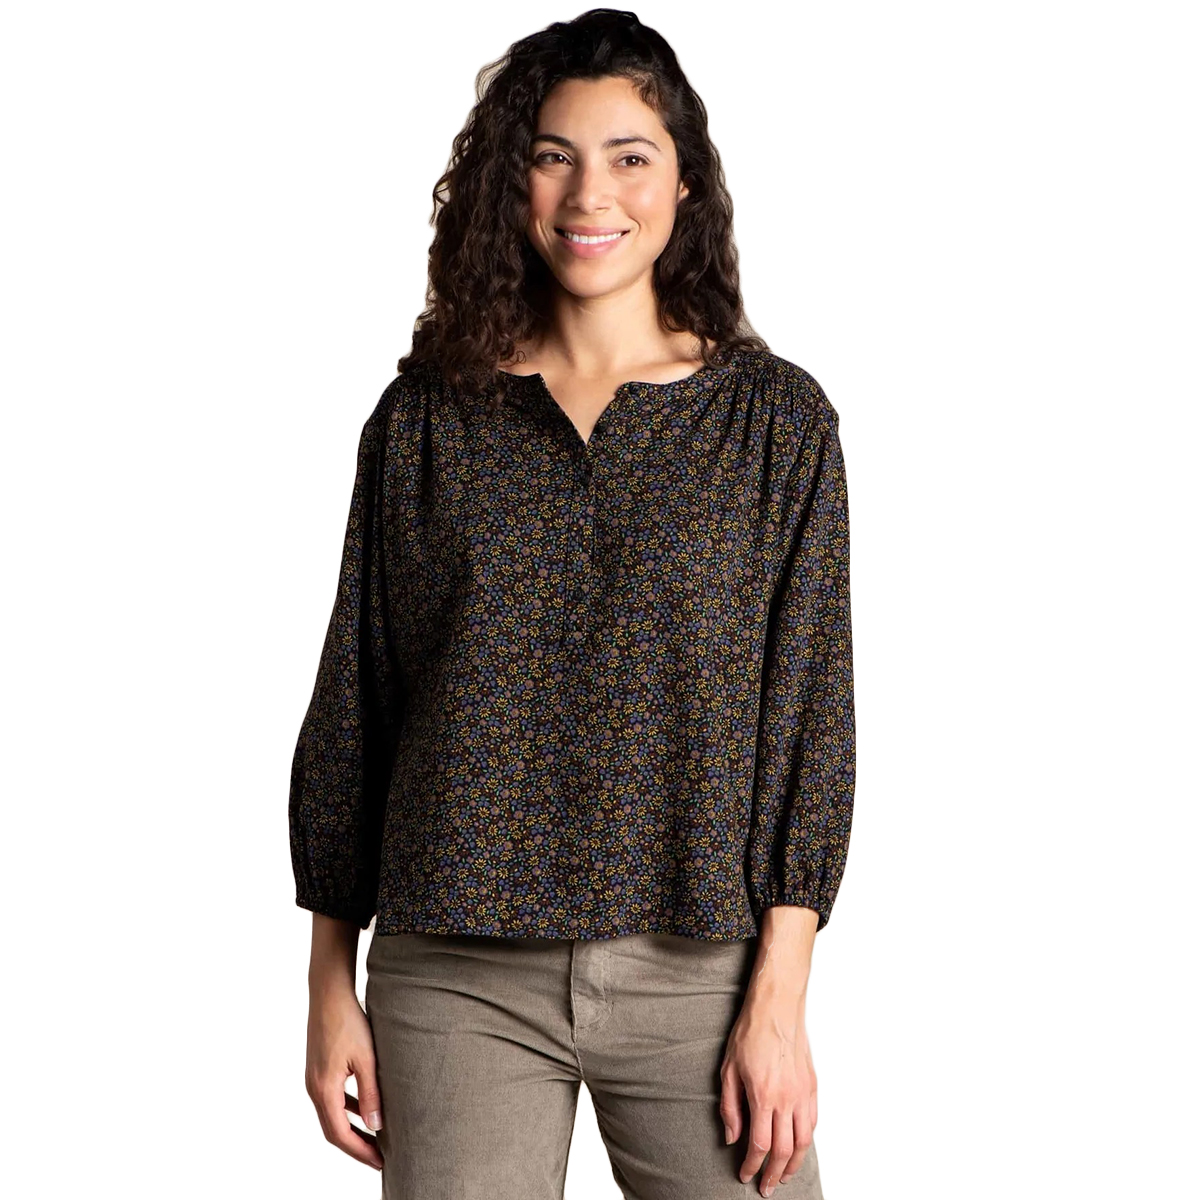 Toad & Co Women's Manzana Long-Sleeve Peasant Top - Size XL